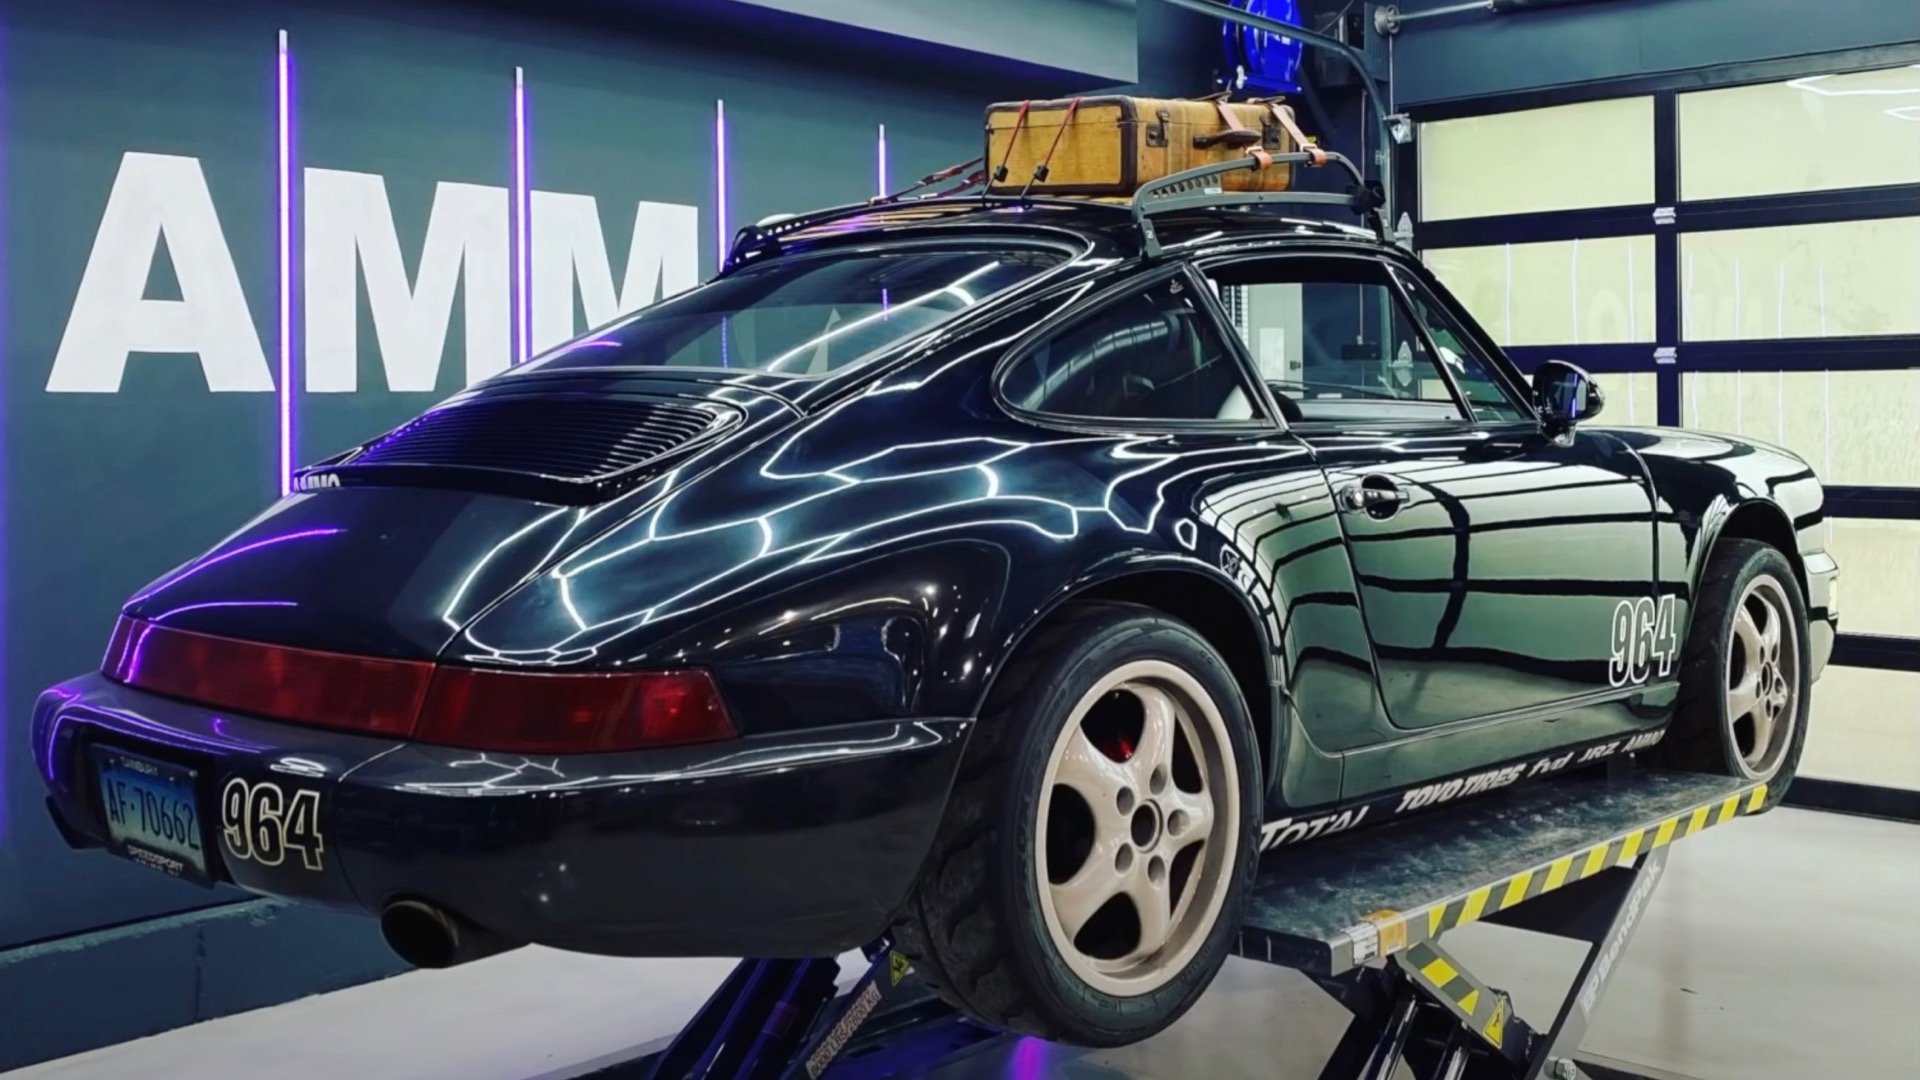 Here's how the ultimate car detailing garage was built